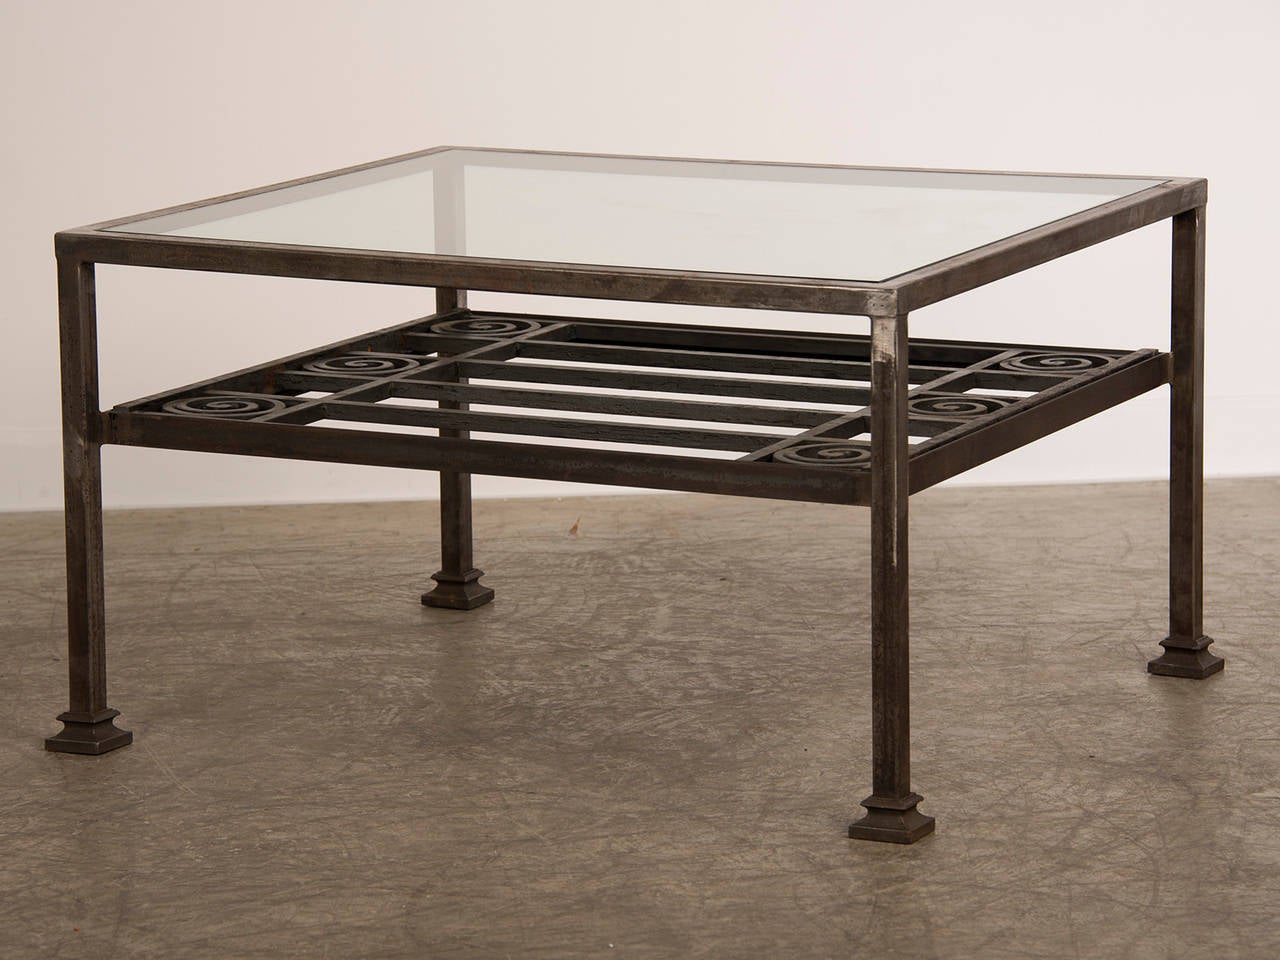 Art Deco Period Forged Iron Grate, France circa 1930, Custom Coffee Table 4